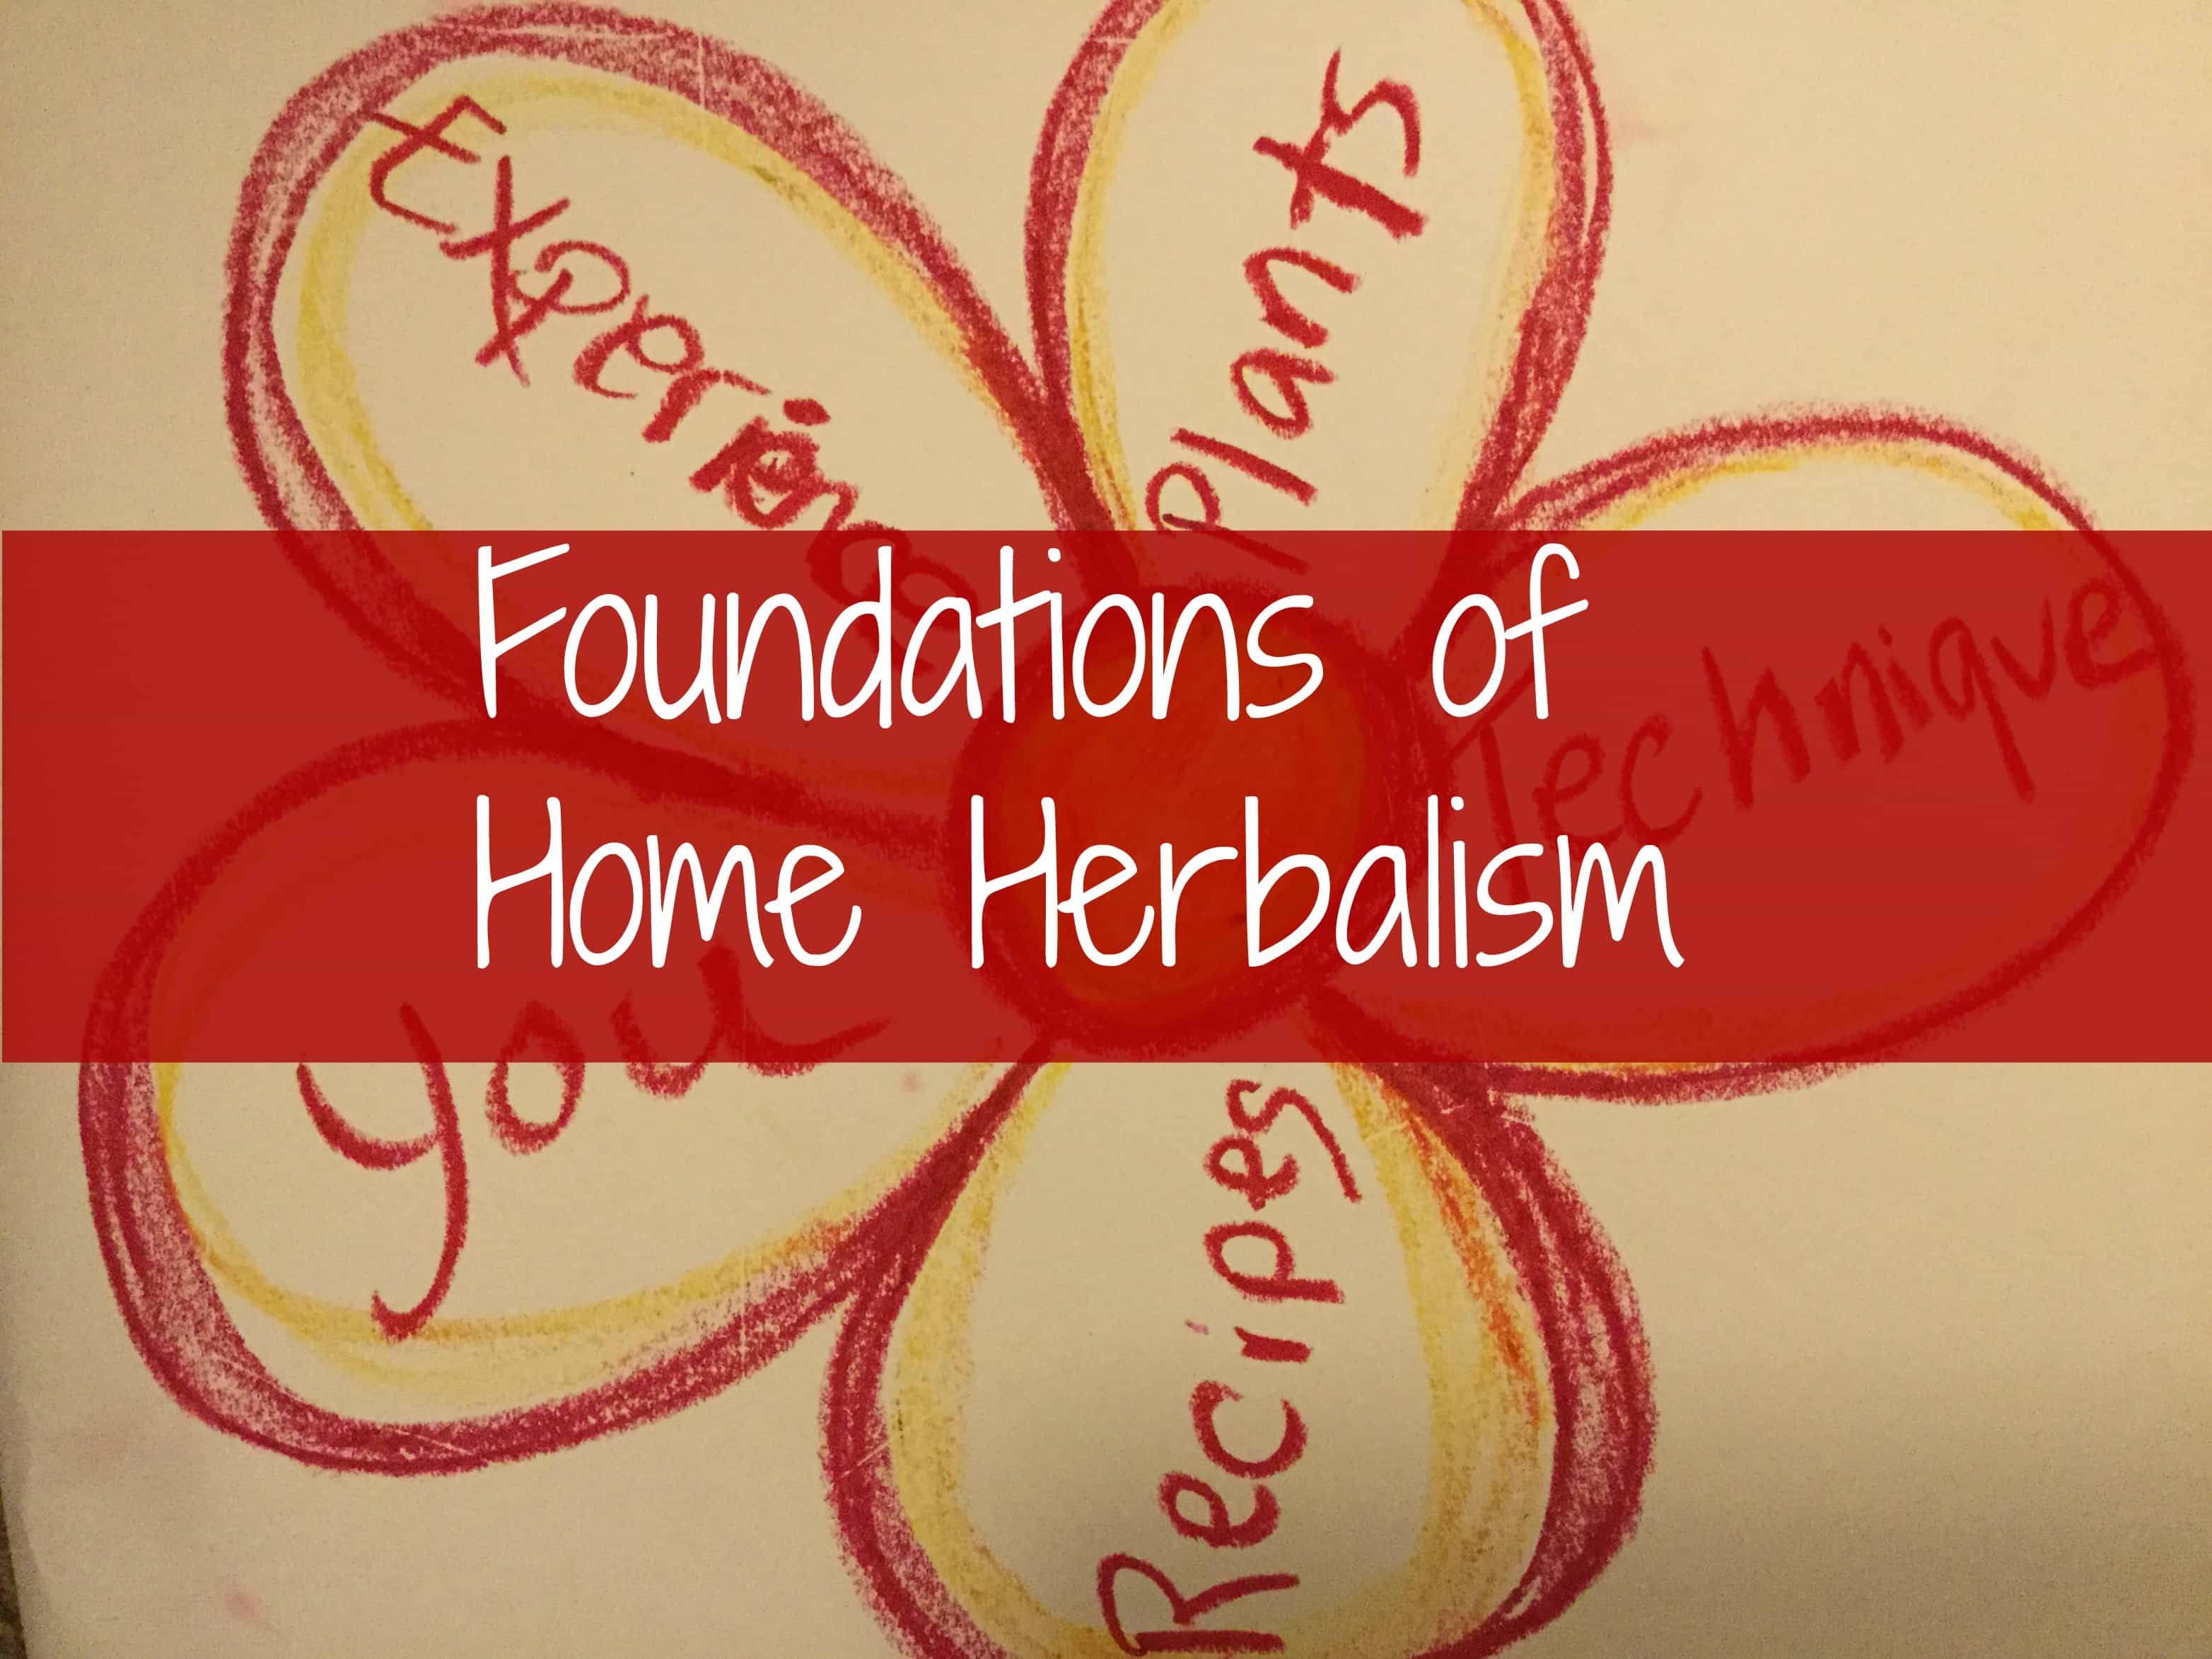 Foundations of Home Herbalism